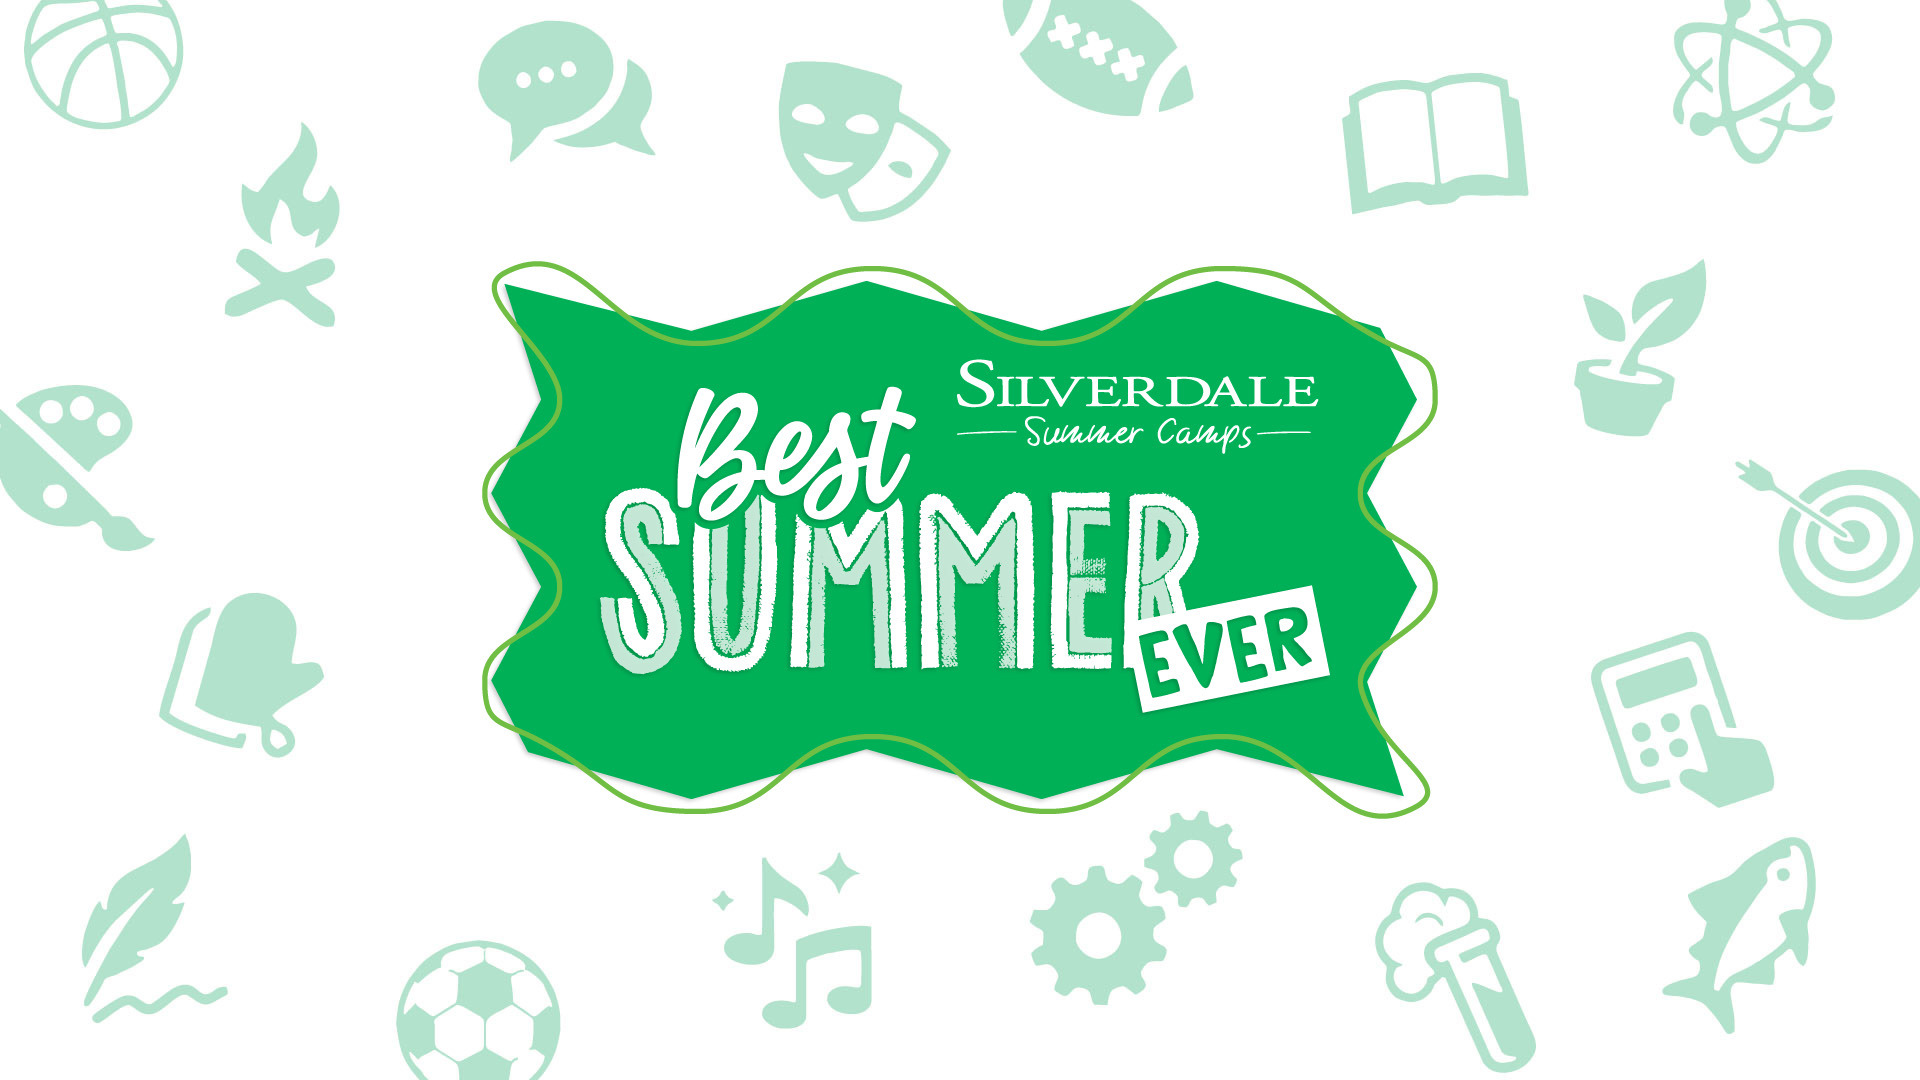 Silverdale Summer Camps